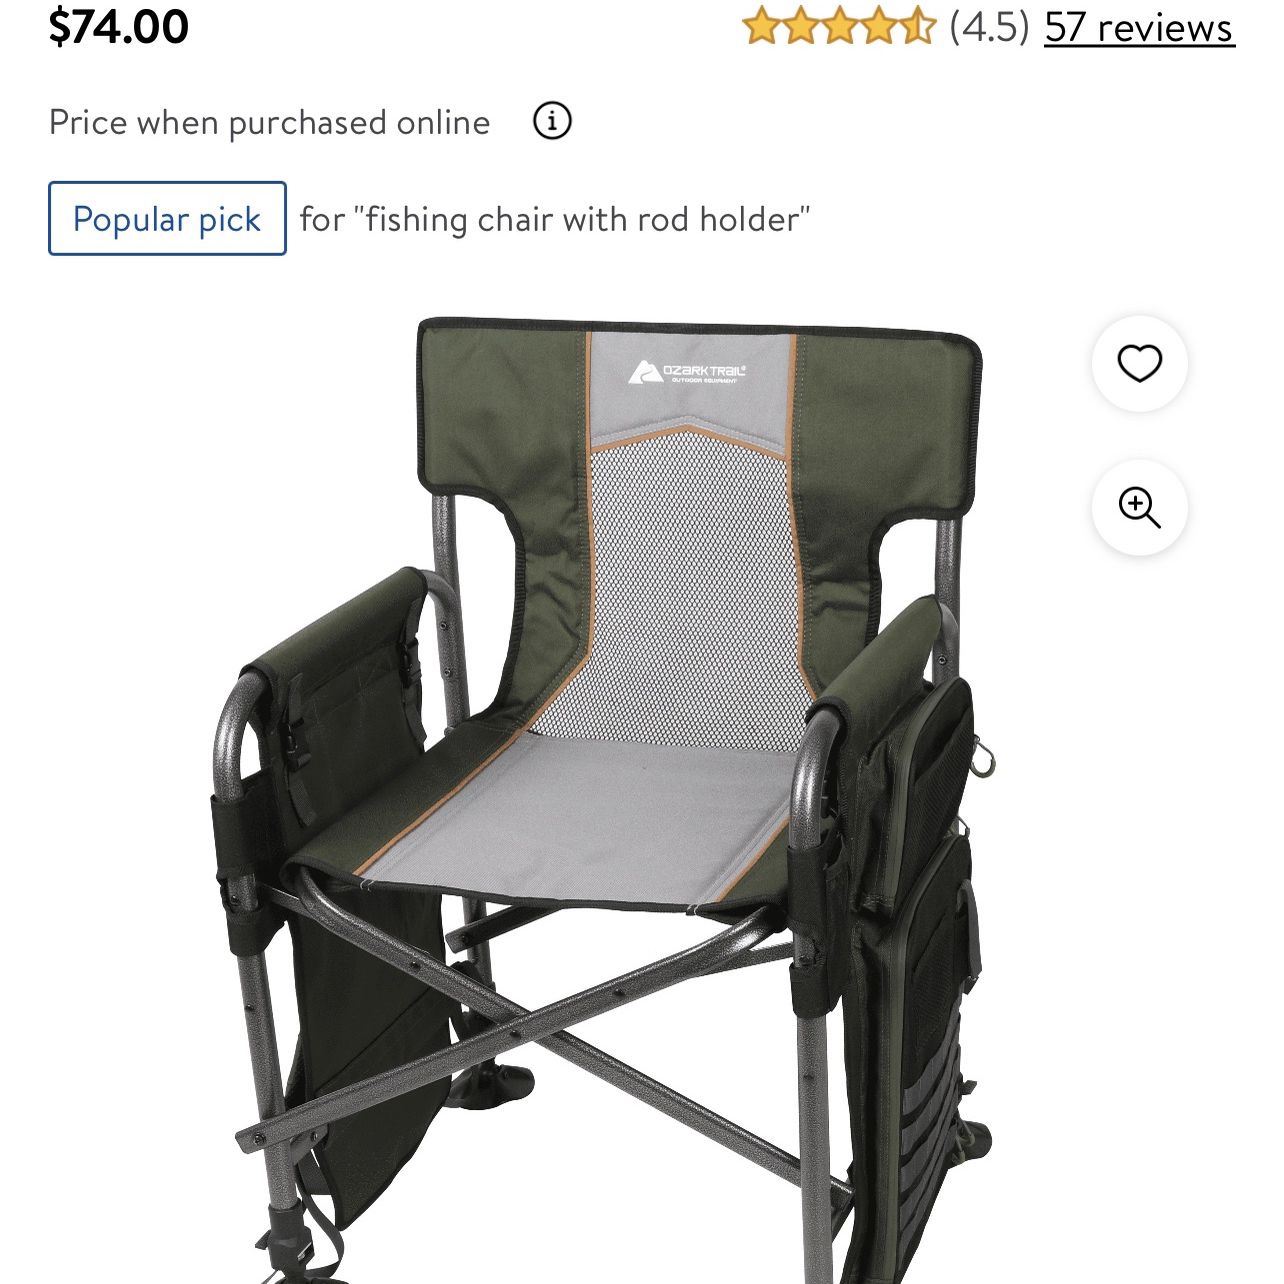 Ozark Trail Fishing Chair With Rod Holder ((firm Price) for Sale